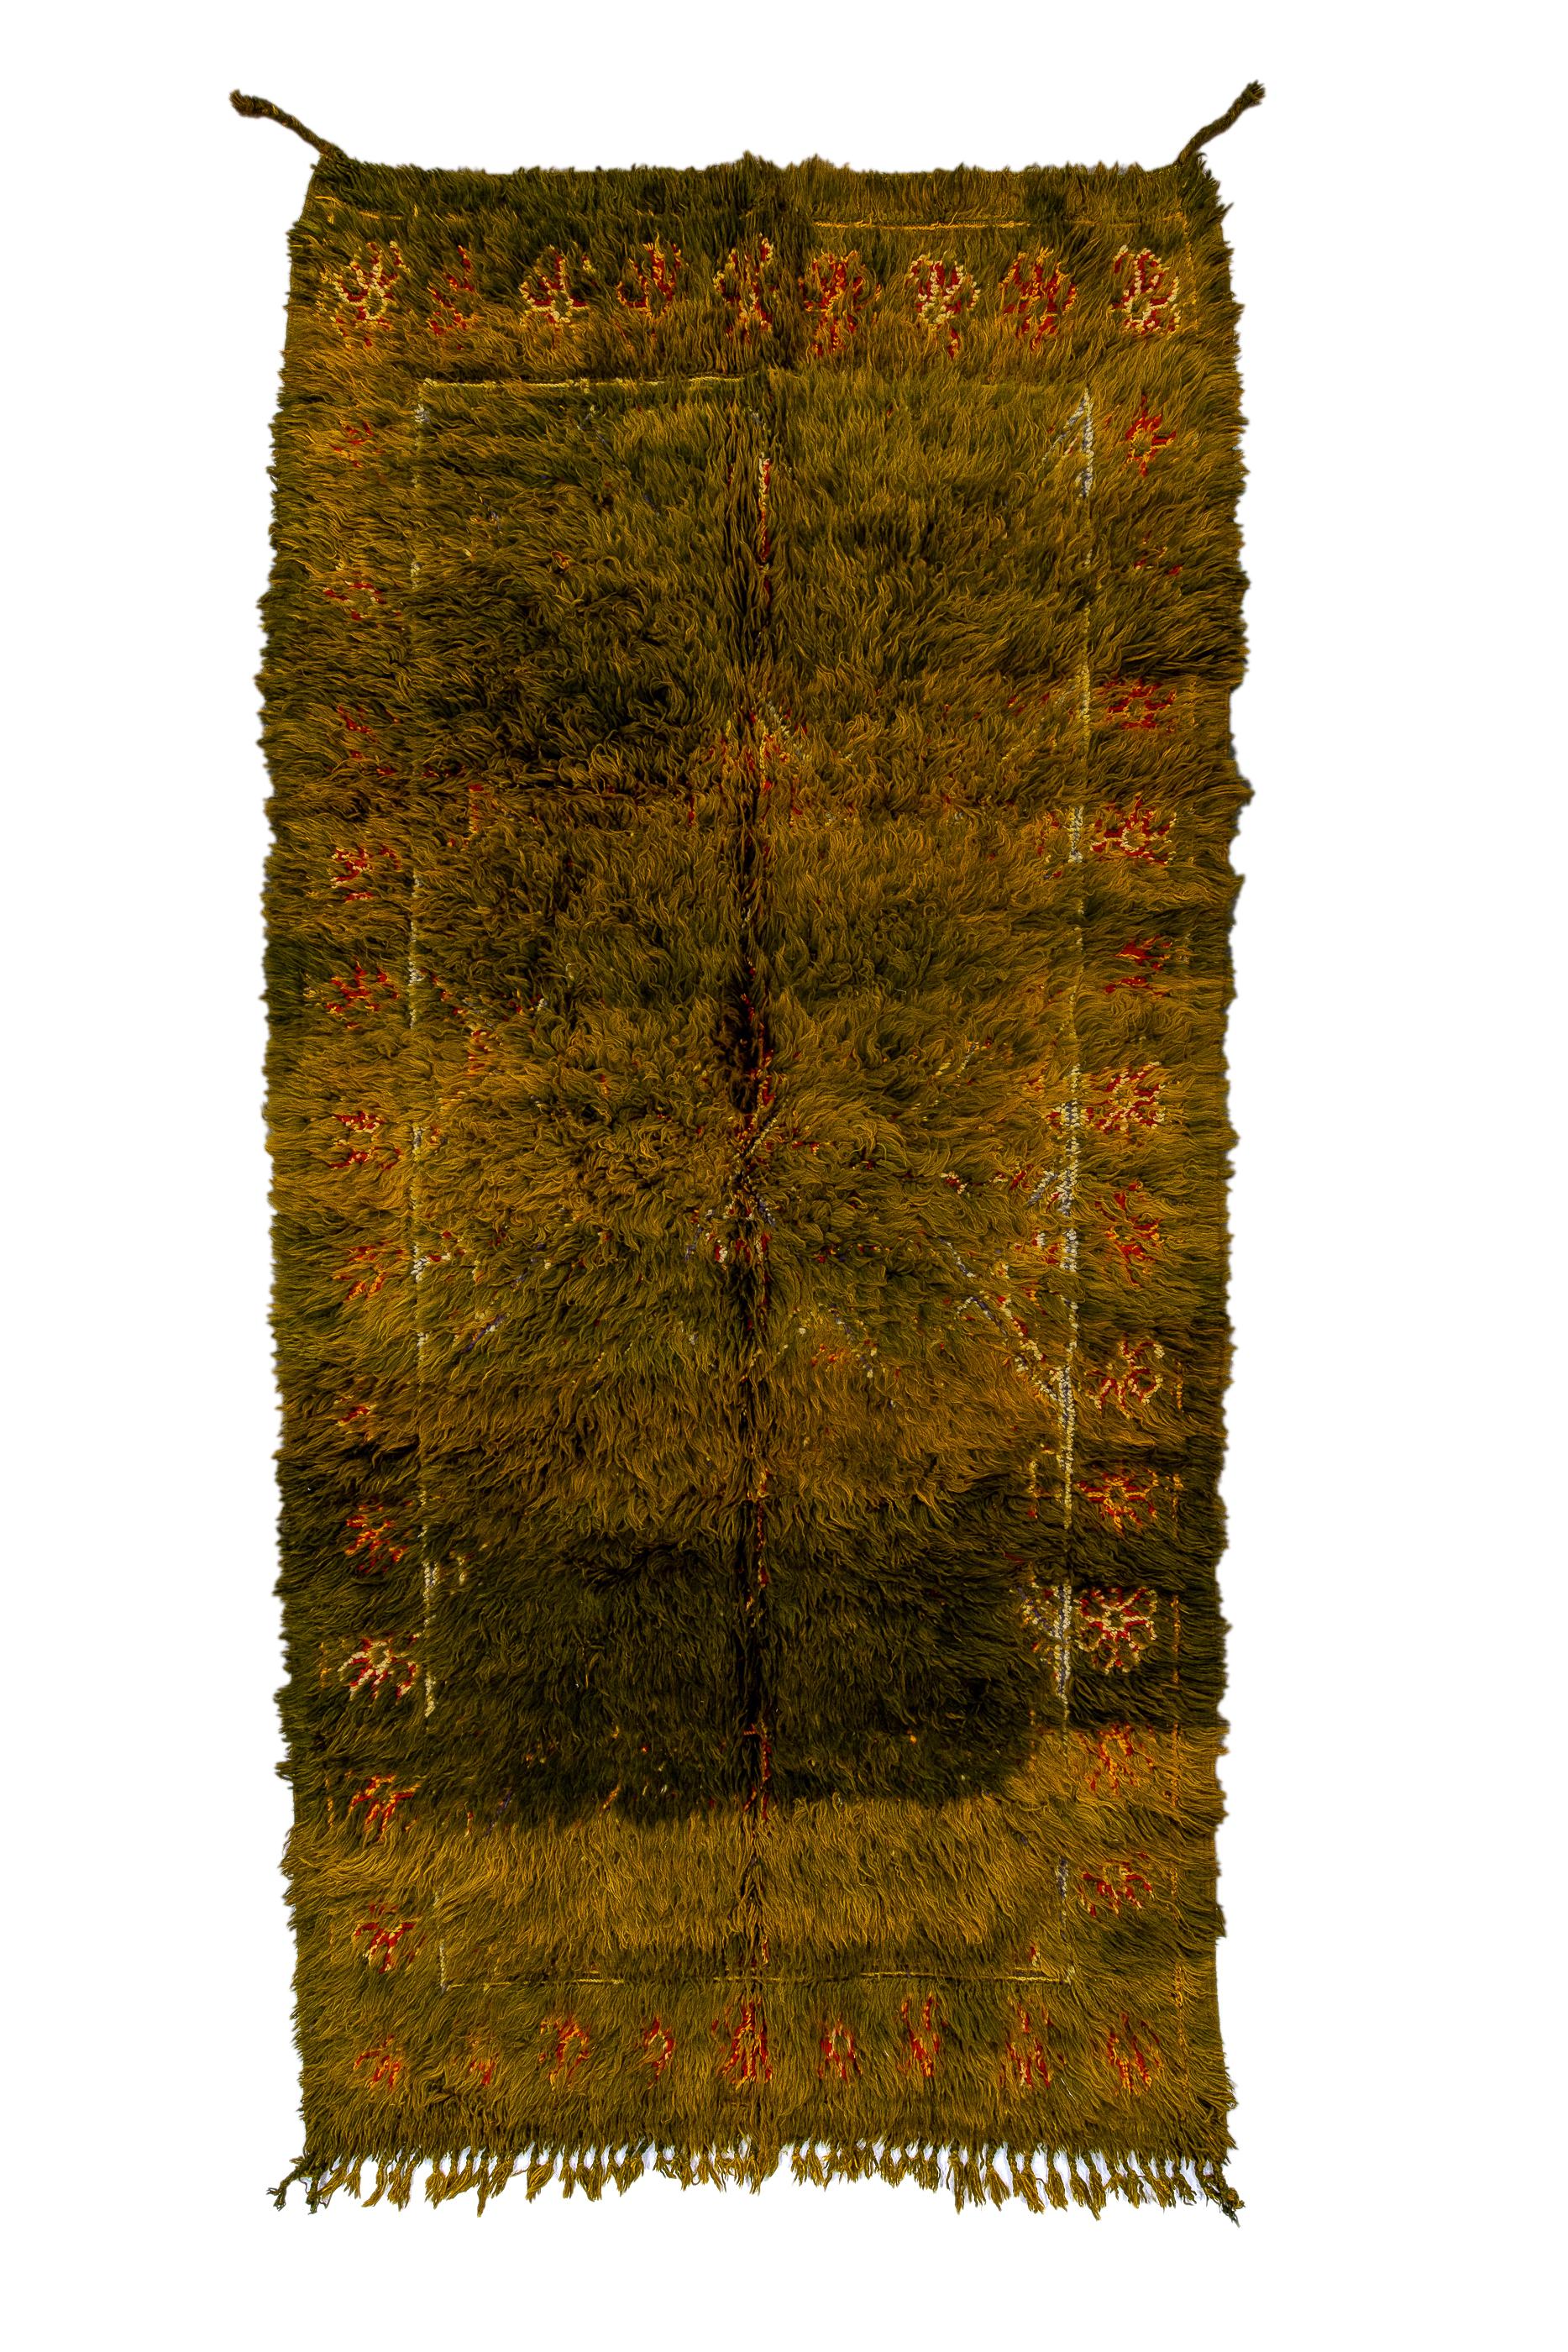 This extremely long pile rustic rug shows an  abrashed brown field, a string ecru inner boder, and a shaggy brown main frame. Full width of tassels at one end. Intended for maximal warmth on the coldest days. Coarse weave on wool. Good